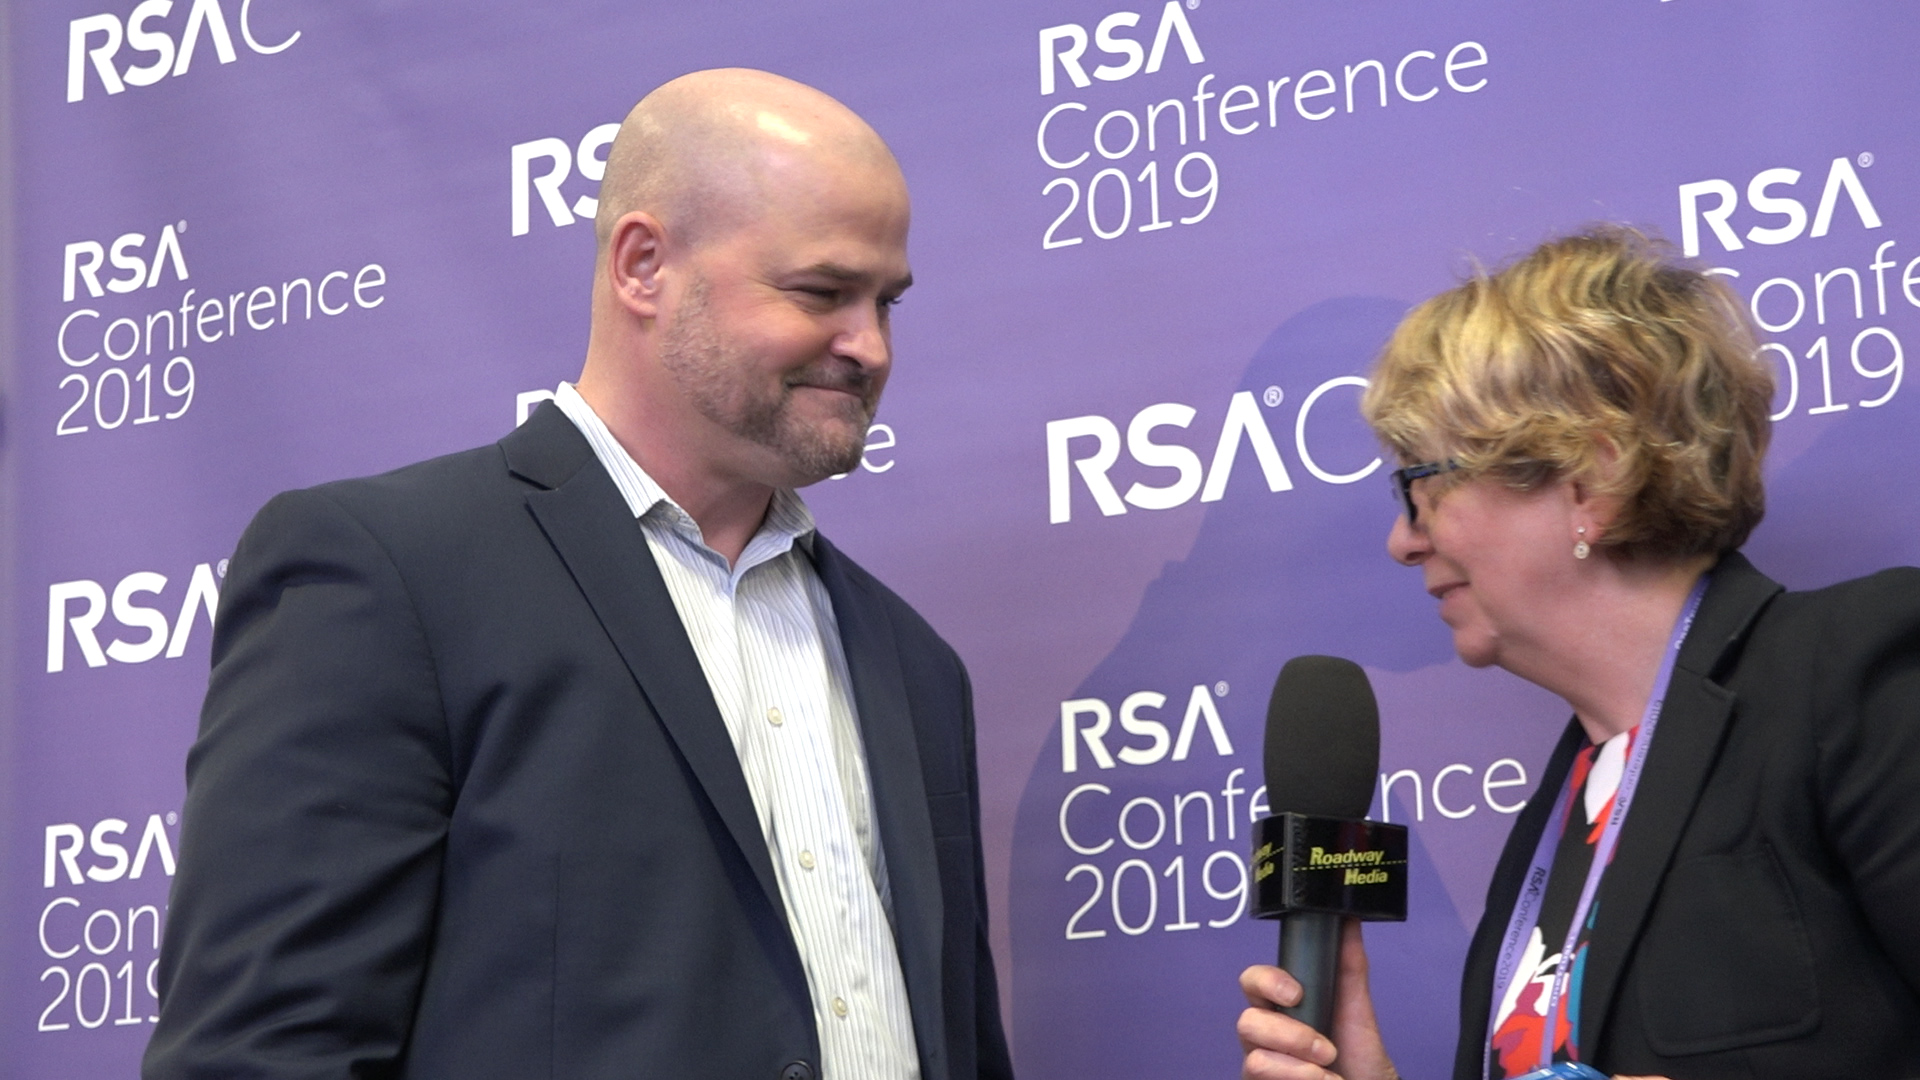 Interview with Deloitte’s Cyber Risk & Financial Services at RSA 2019